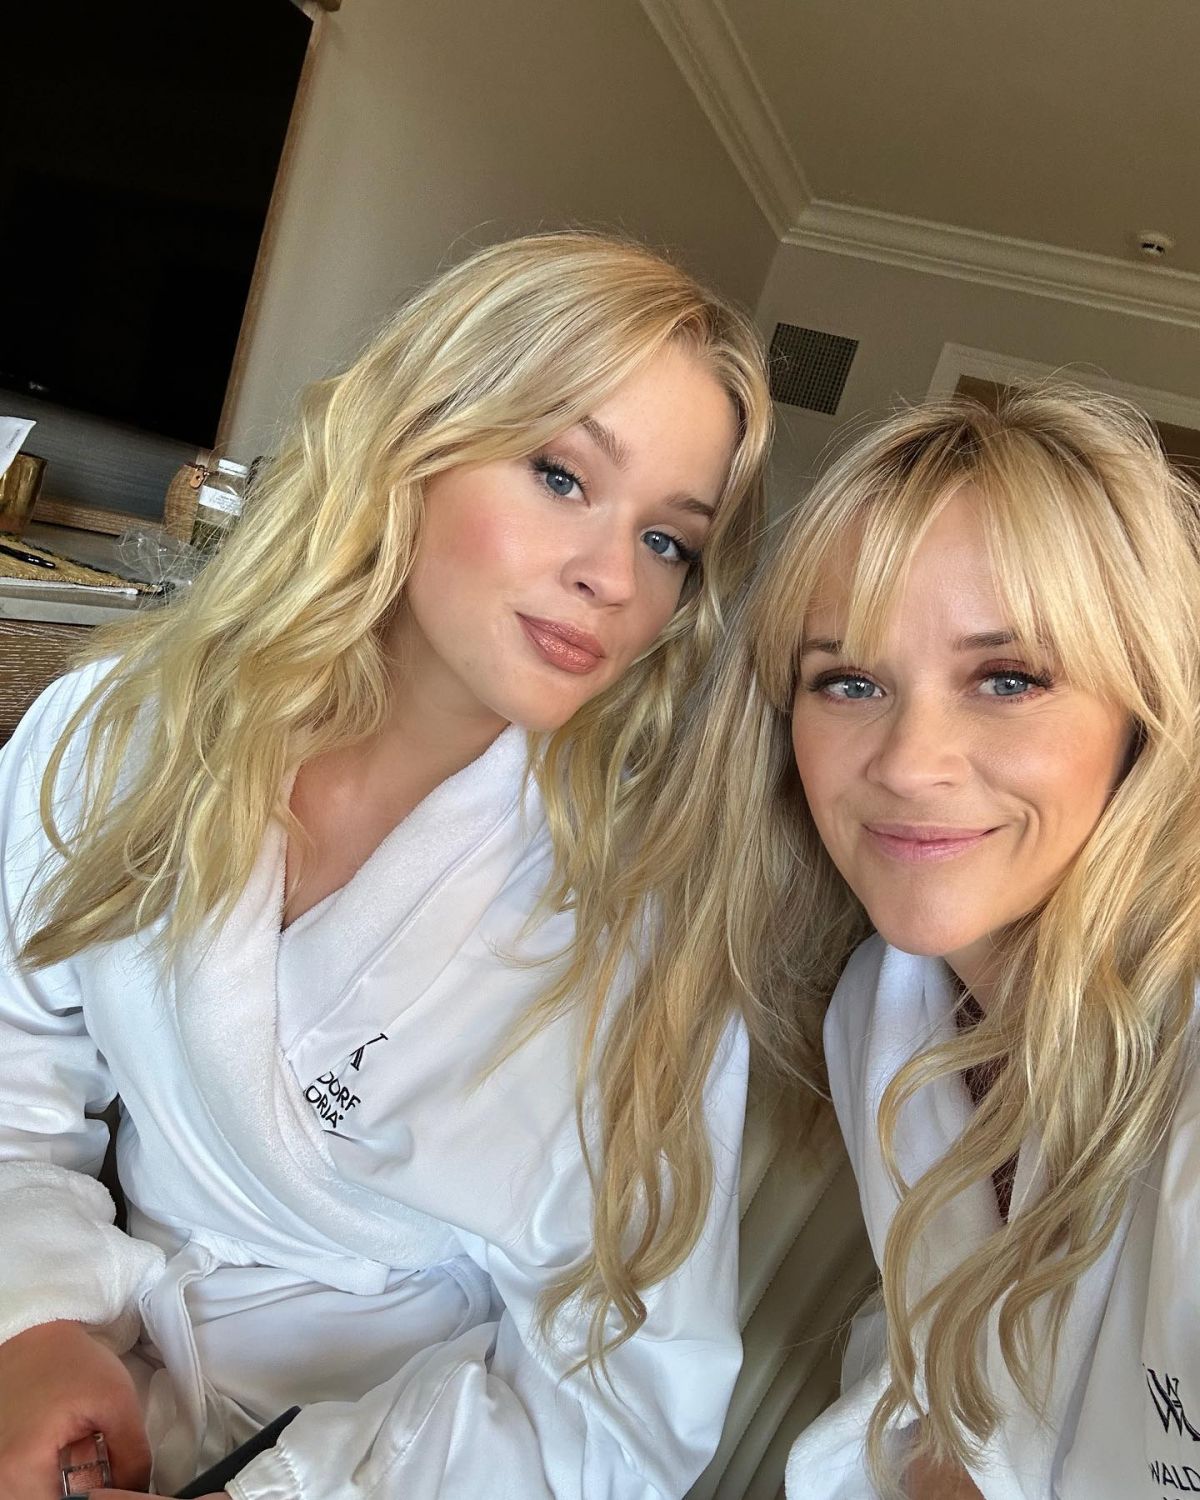 Reese Witherspoon Shares Fun Instagram Photos